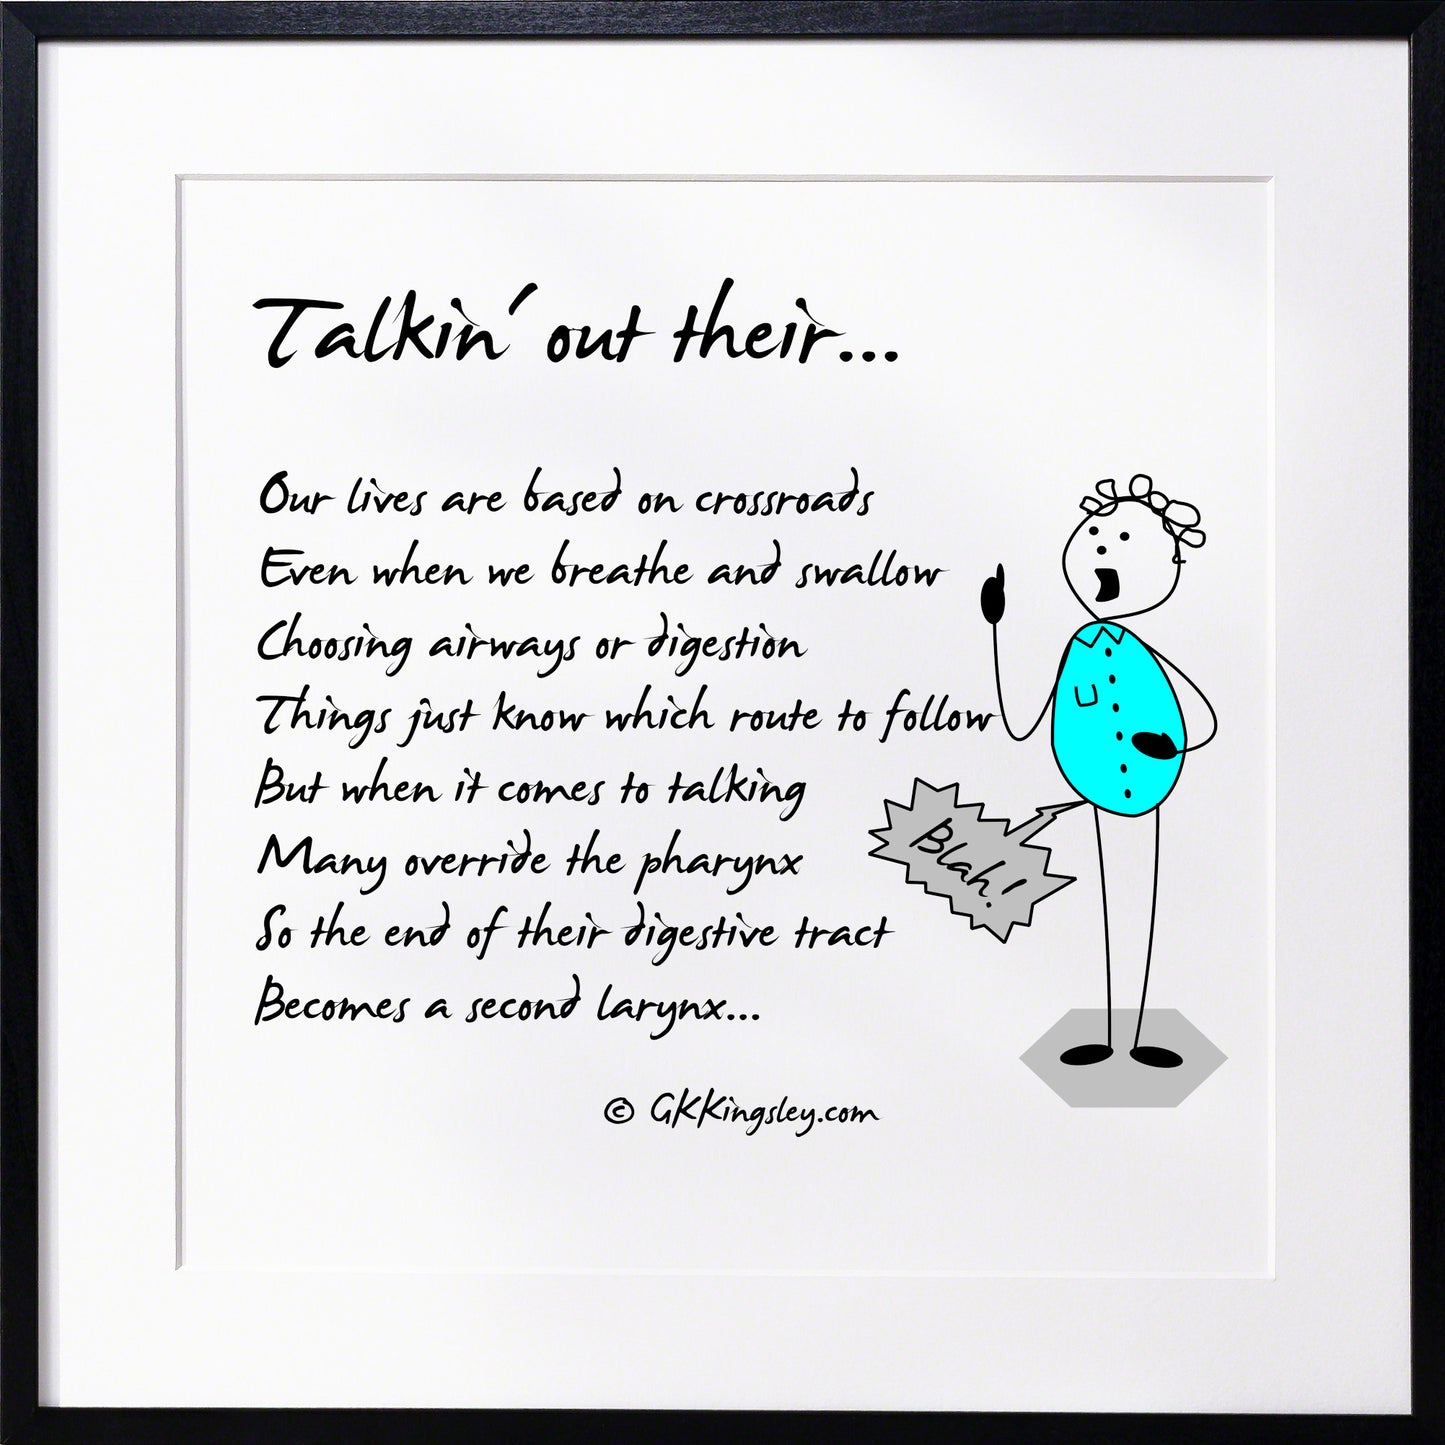 Pick Your Favourite Poem to Have in Your Home!